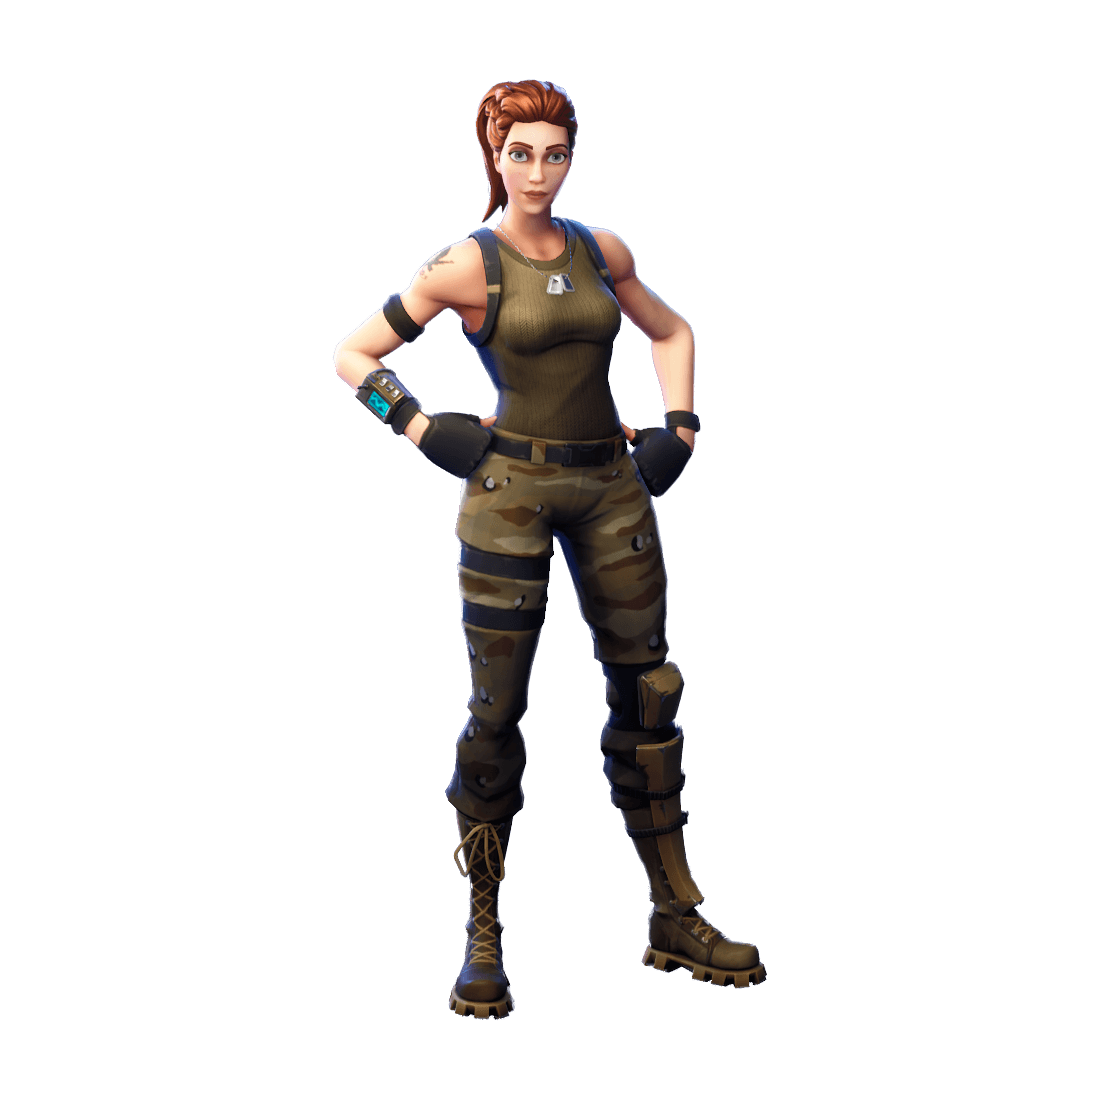 Uncommon Tower Recon Specialist Outfit Fortnite Cosmetic Cost 800 V